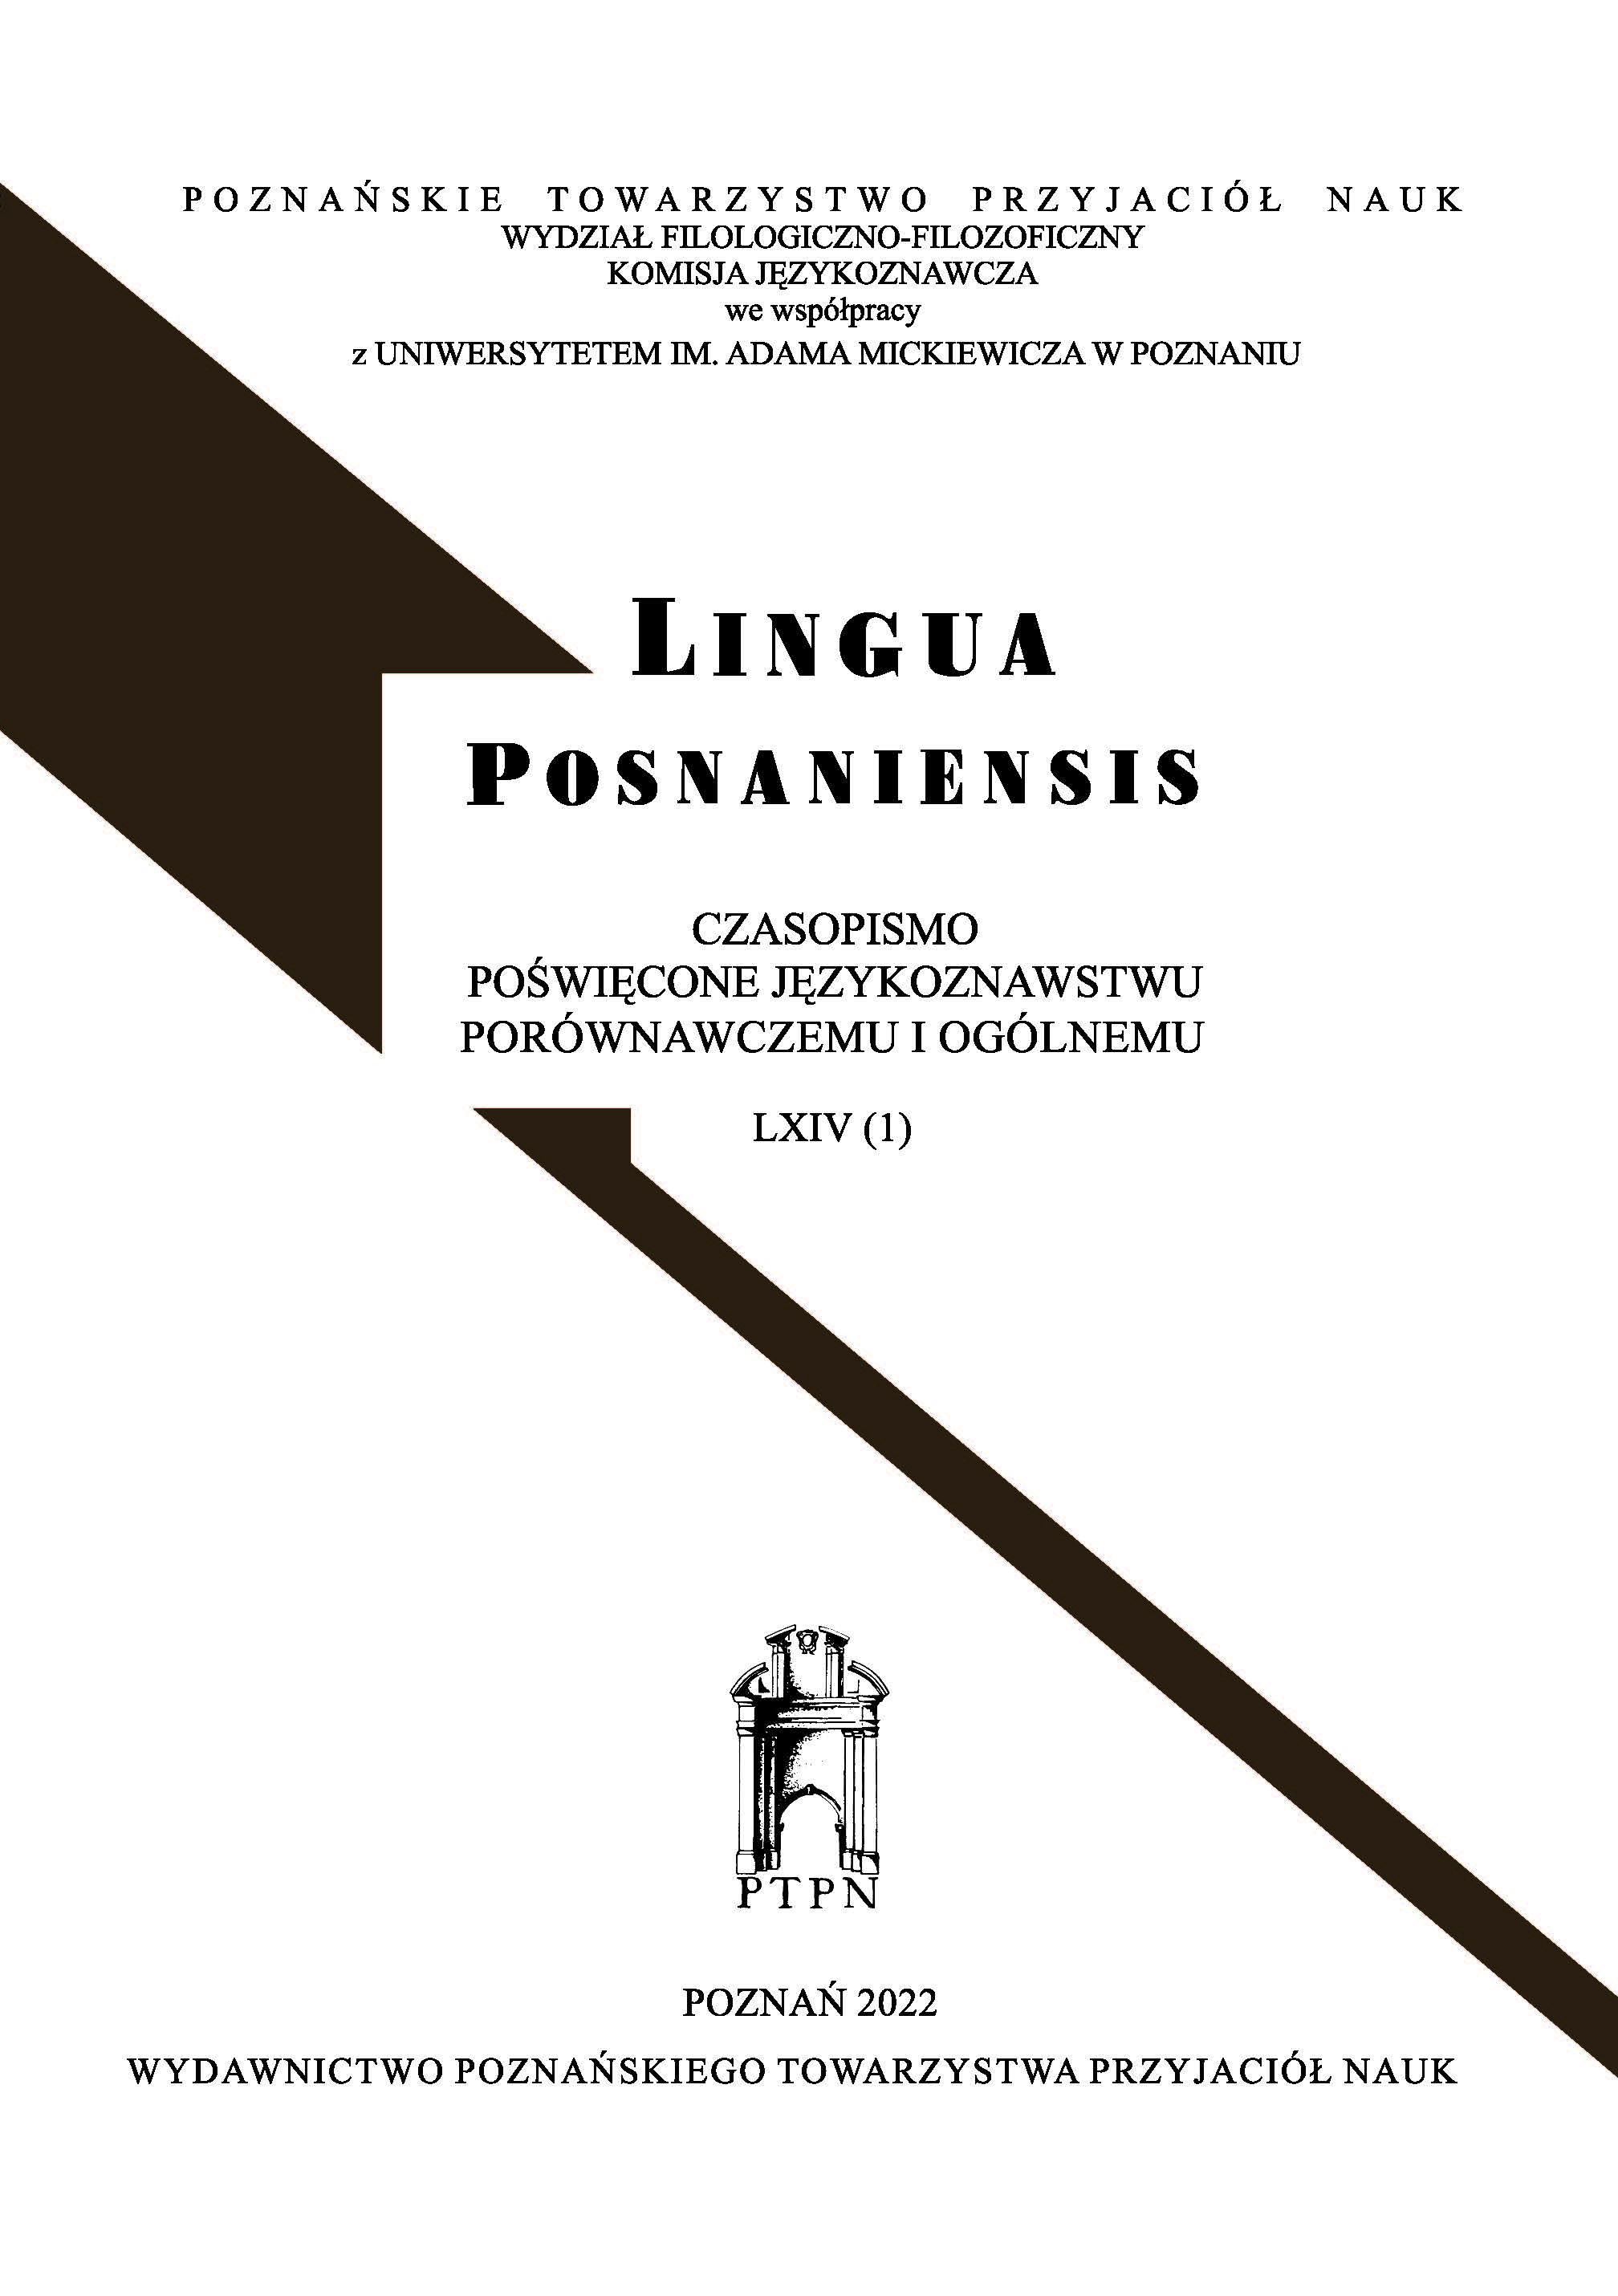 Semito-Hamitic or Afro-Asiatic consonantism and lexicon: Episodes of a comparative research I (Part 1: The long century of Semito-Hamitology until the middle of the 20th century) Cover Image